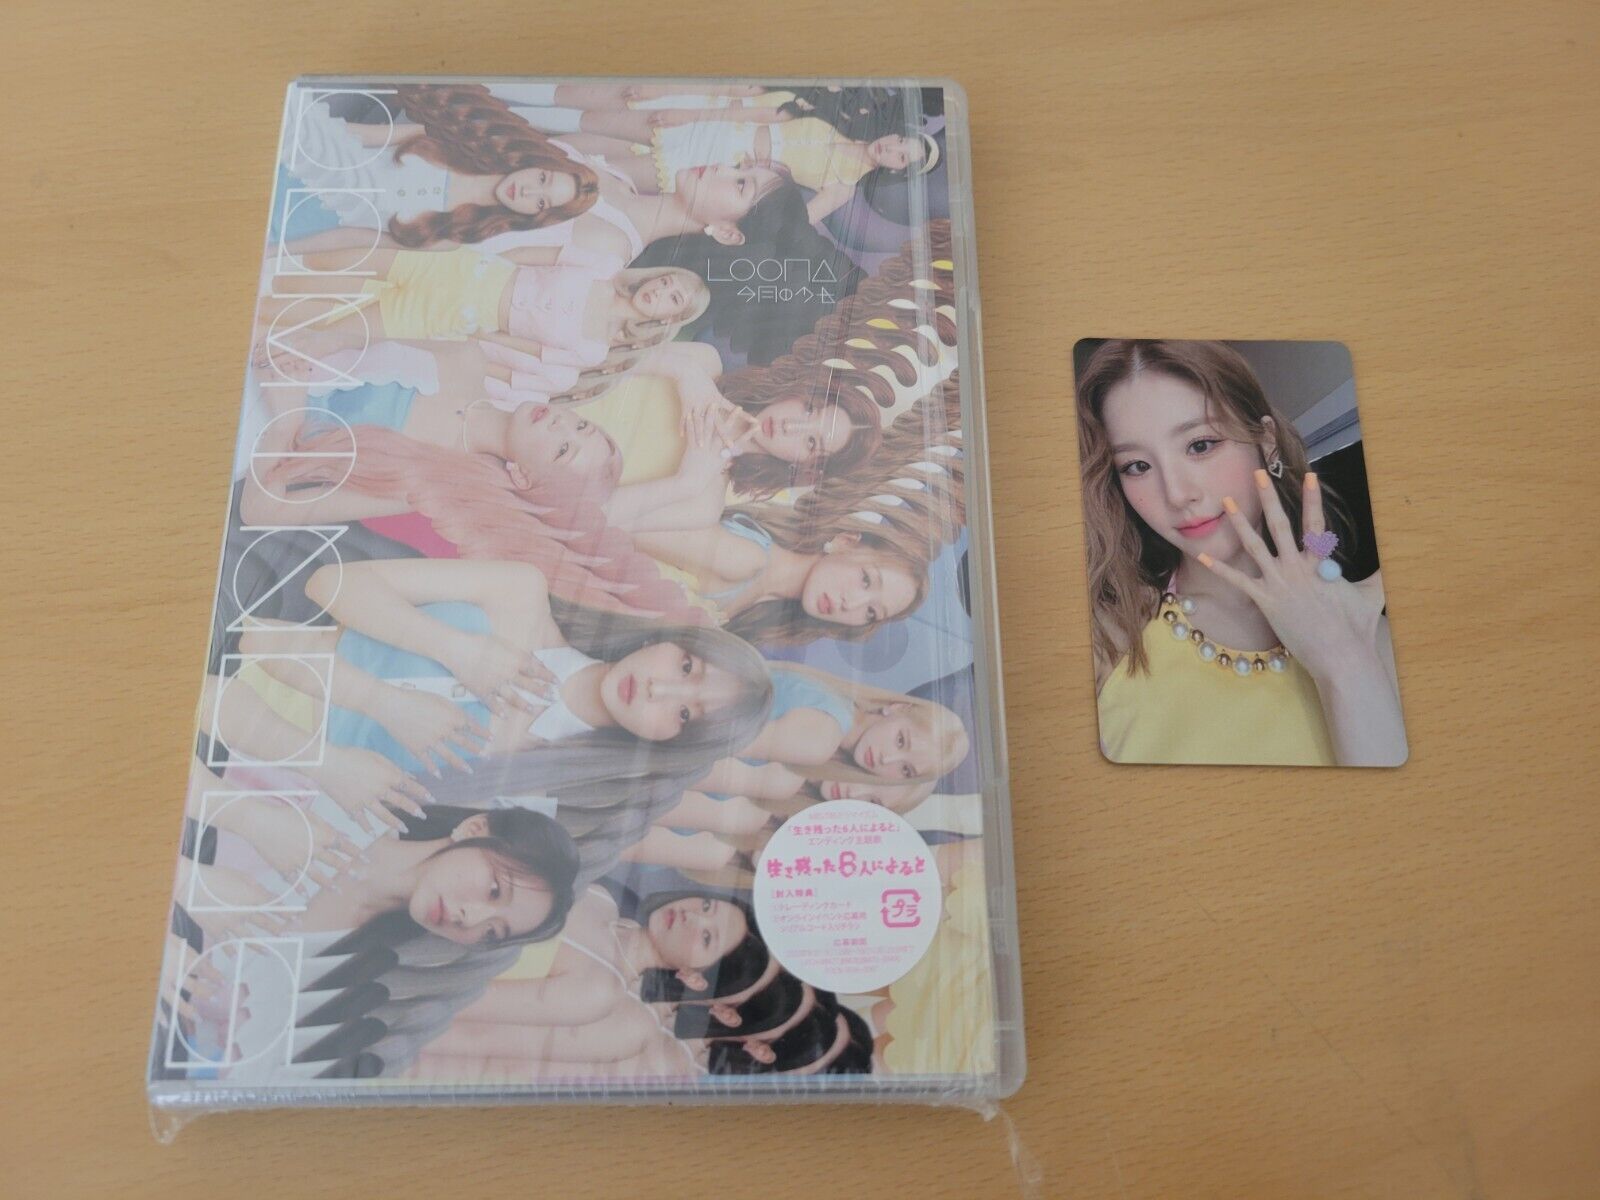 LOONA - Luminous Limited Edition Album (Unsealed, Includes Photocard)